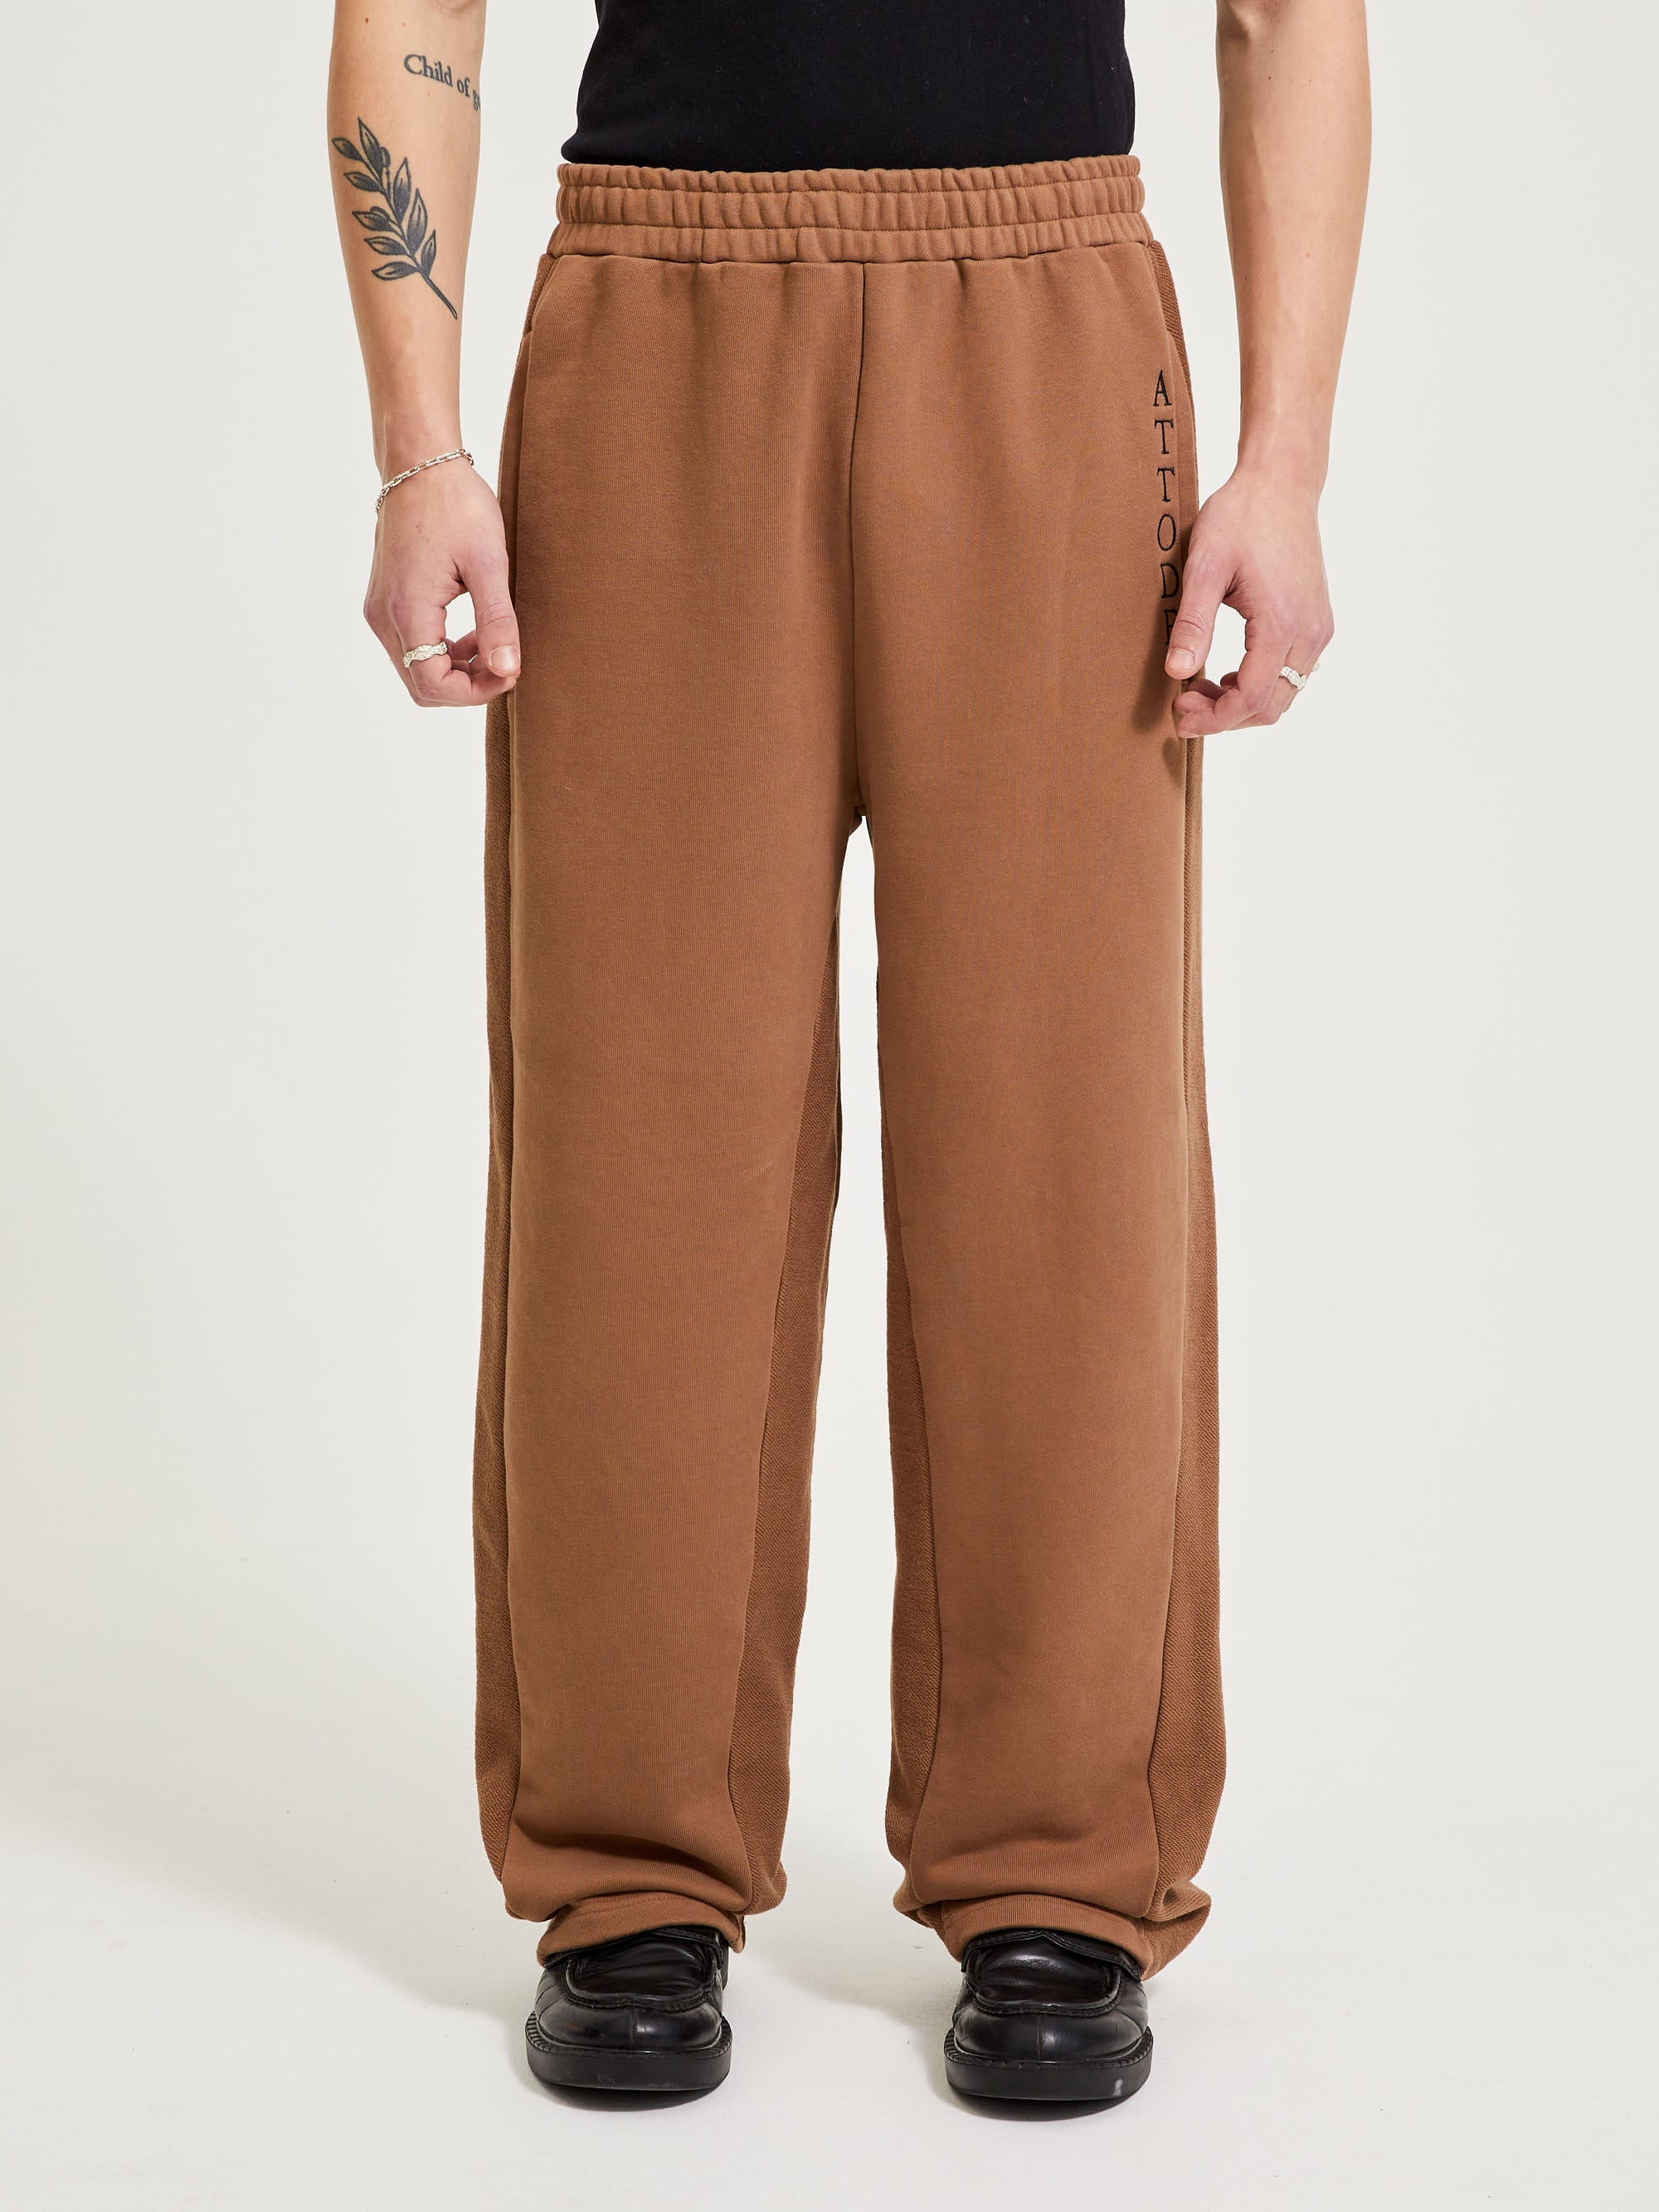 INSIDE OUT SWEATPANTS BROWN - ATTODE